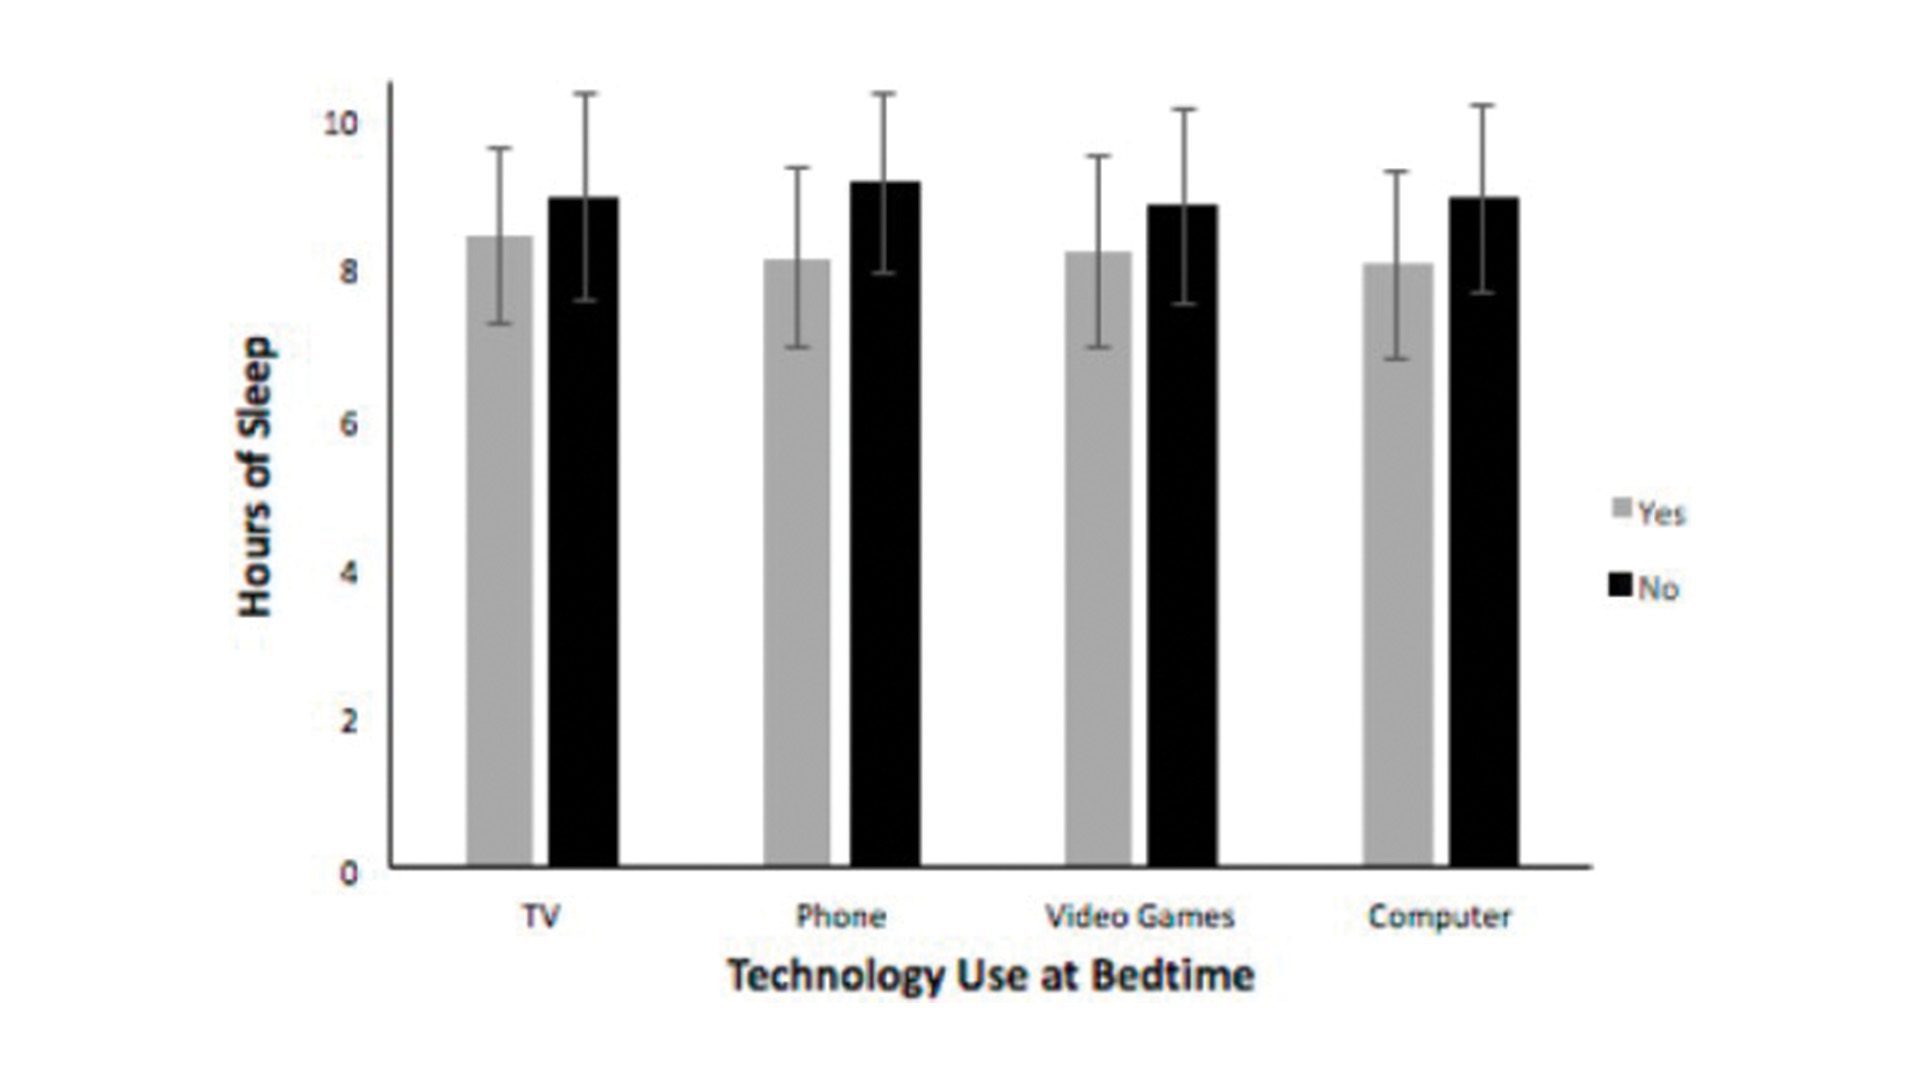 Technology use at bedtime vs hours of sleep